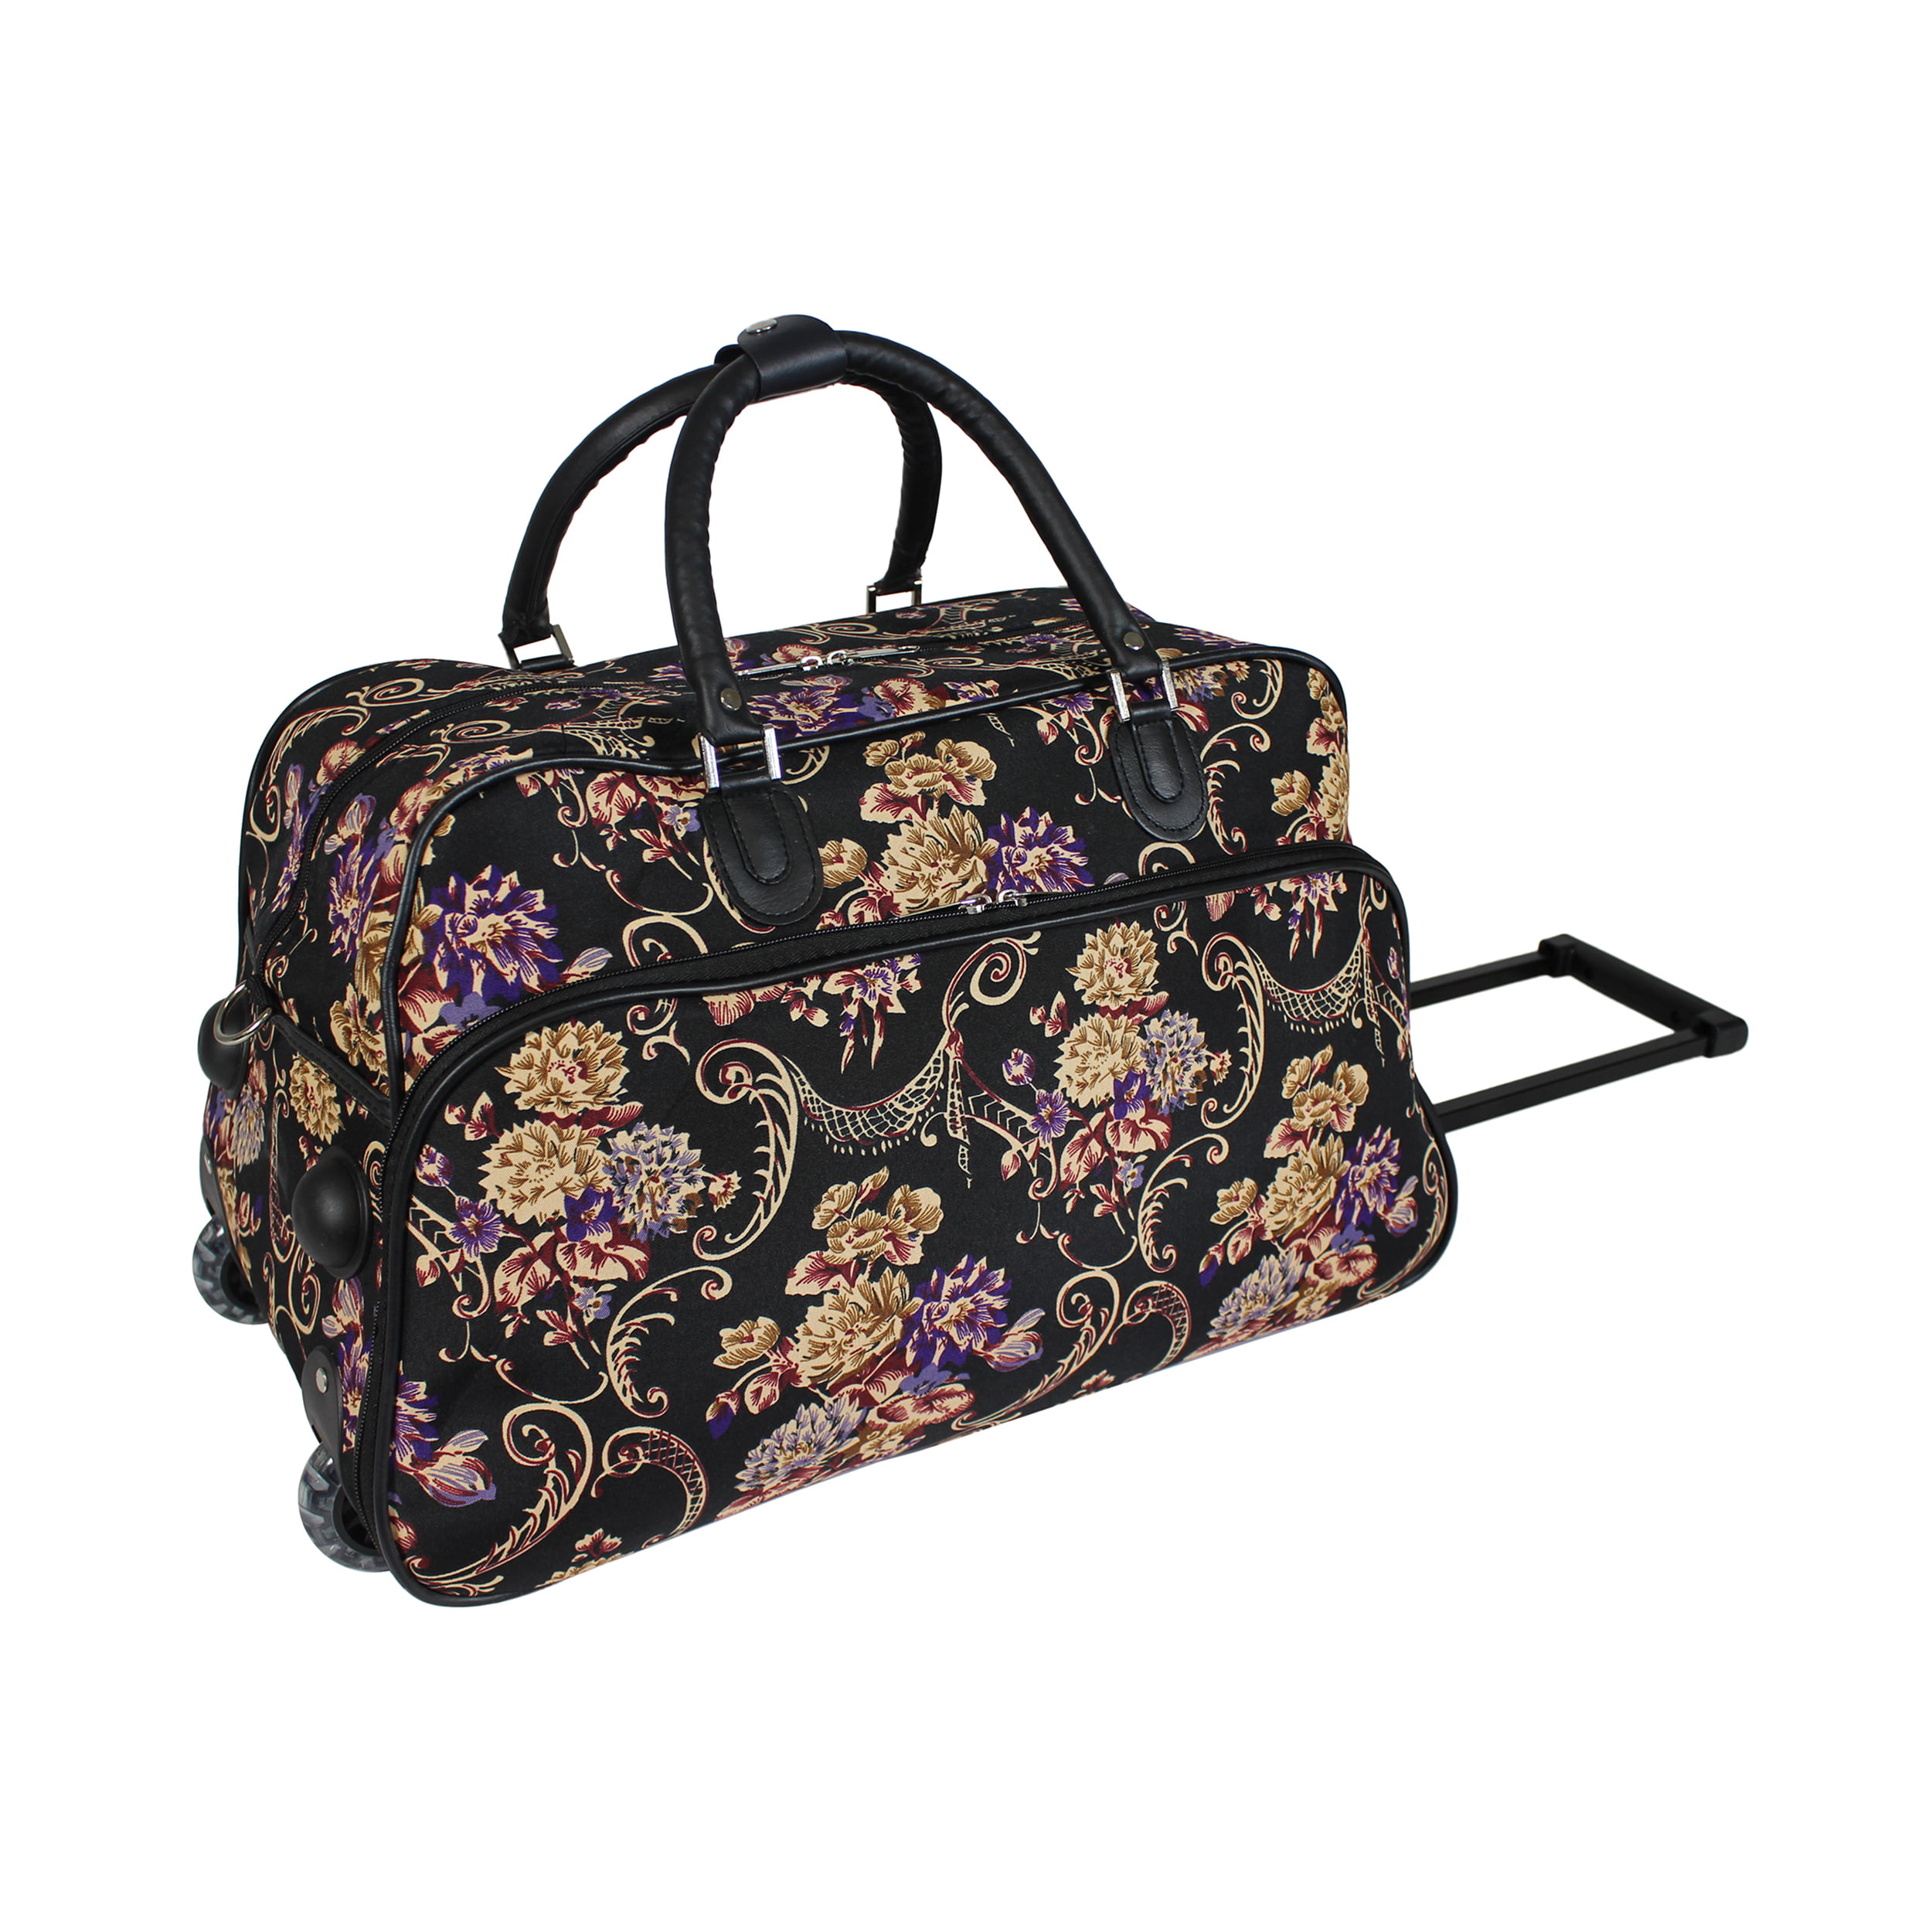 World Traveler Classic Floral 21-in. Carry-On Rolling Duffel Bag - www.waldenwongart.com